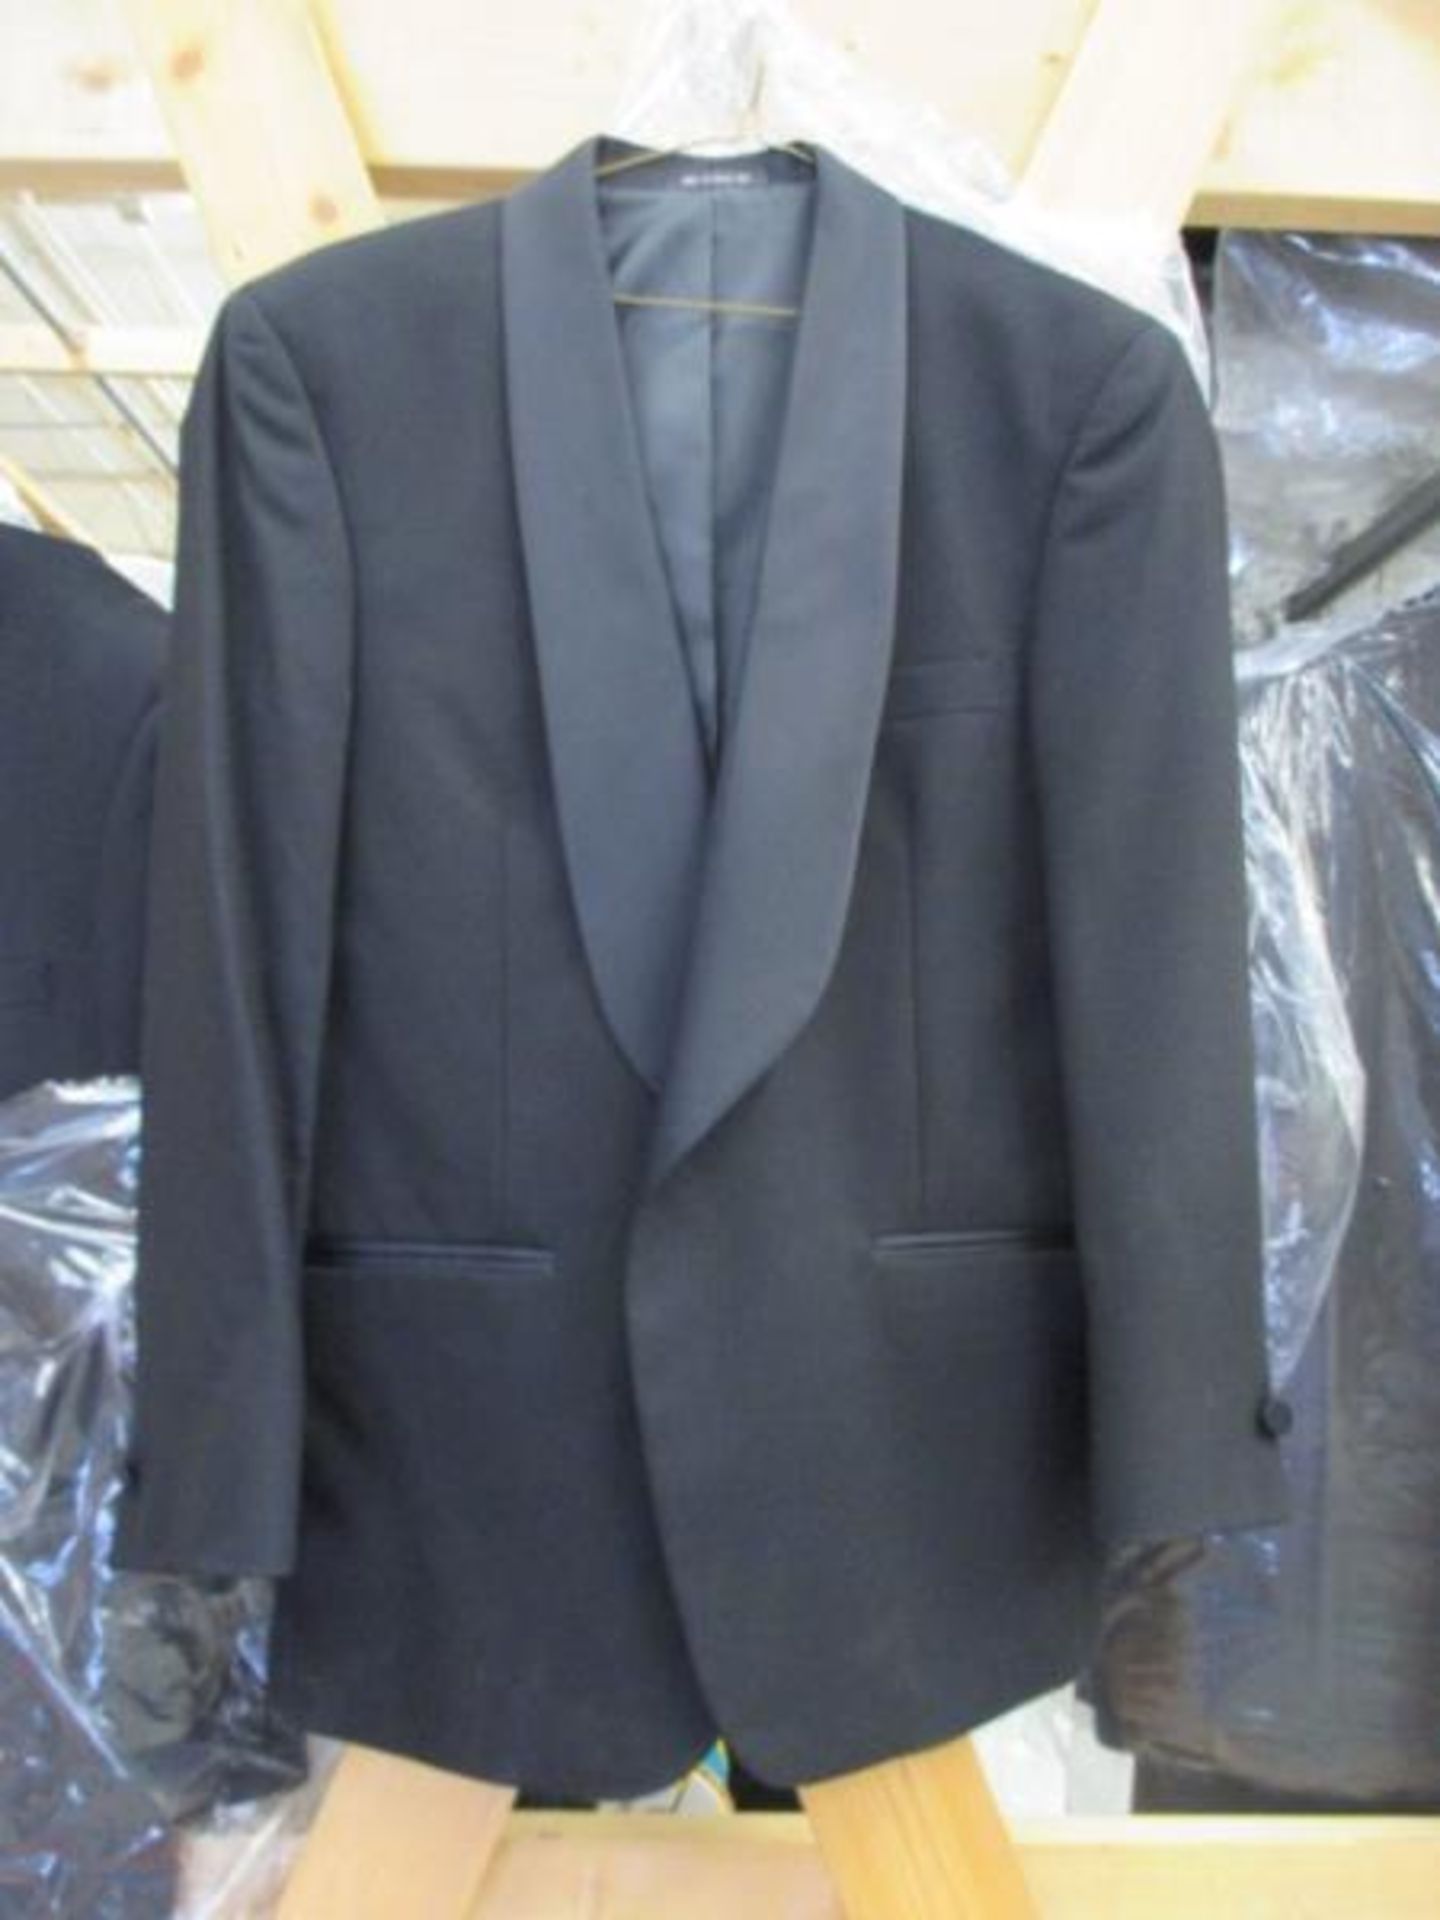 Misc. Men's Tux Coat, 100% Worsted Wool, Approx. 100, Sizes: 39-48 - Image 3 of 3